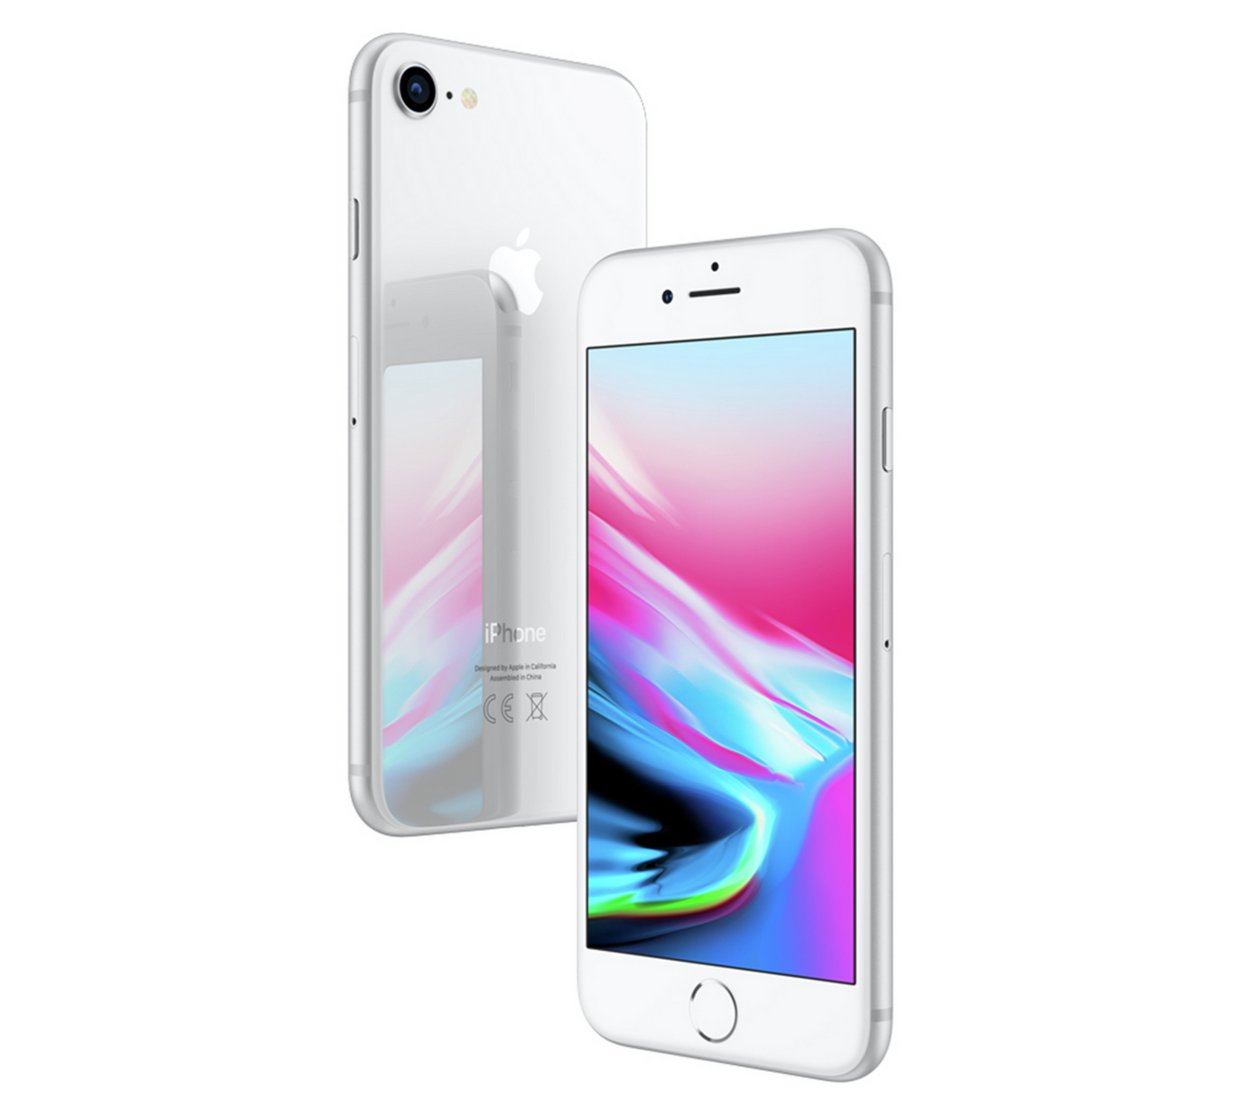 iPhone 8 - 64GB - Silver - Grade B - The iOutlet